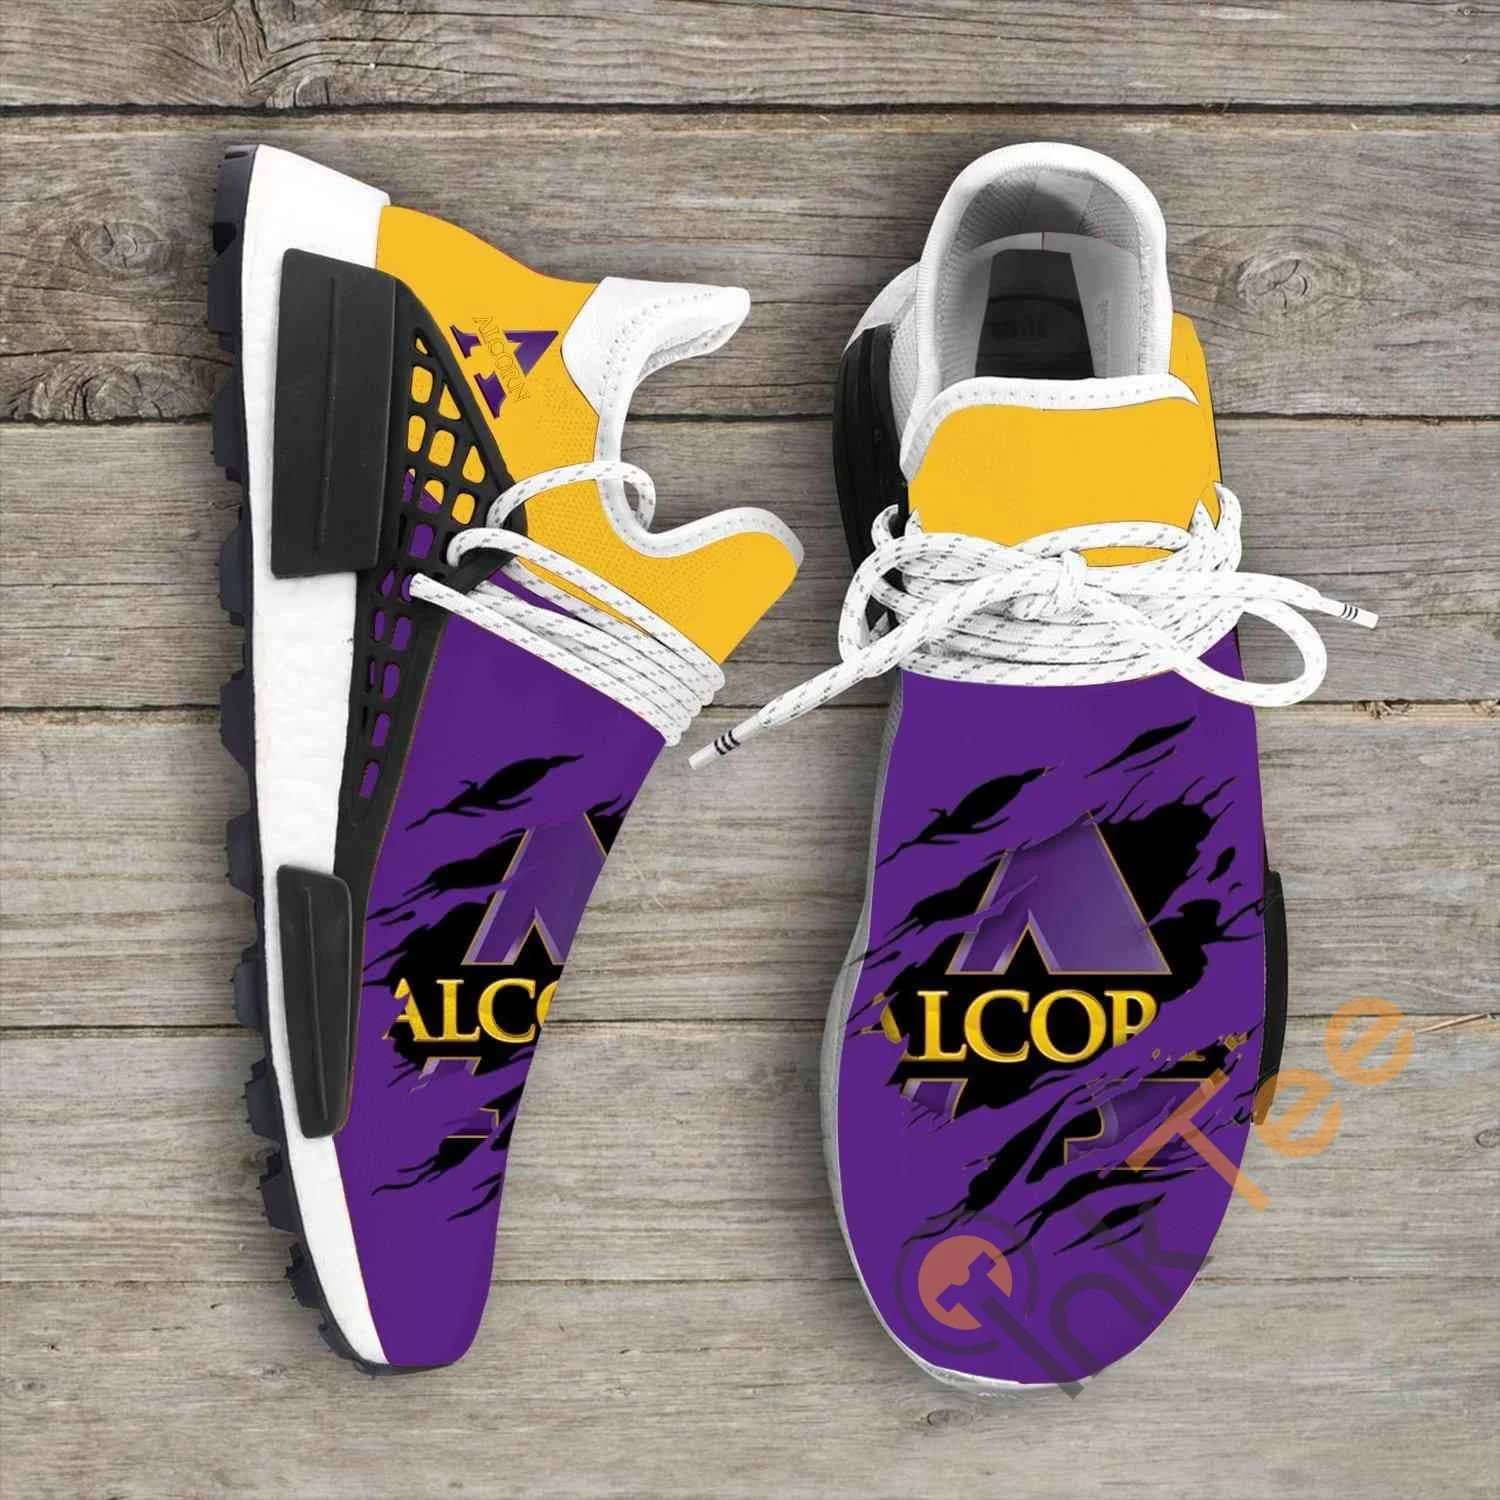 Alcorn State Braves Ncaa Sport Teams NMD Human Shoes